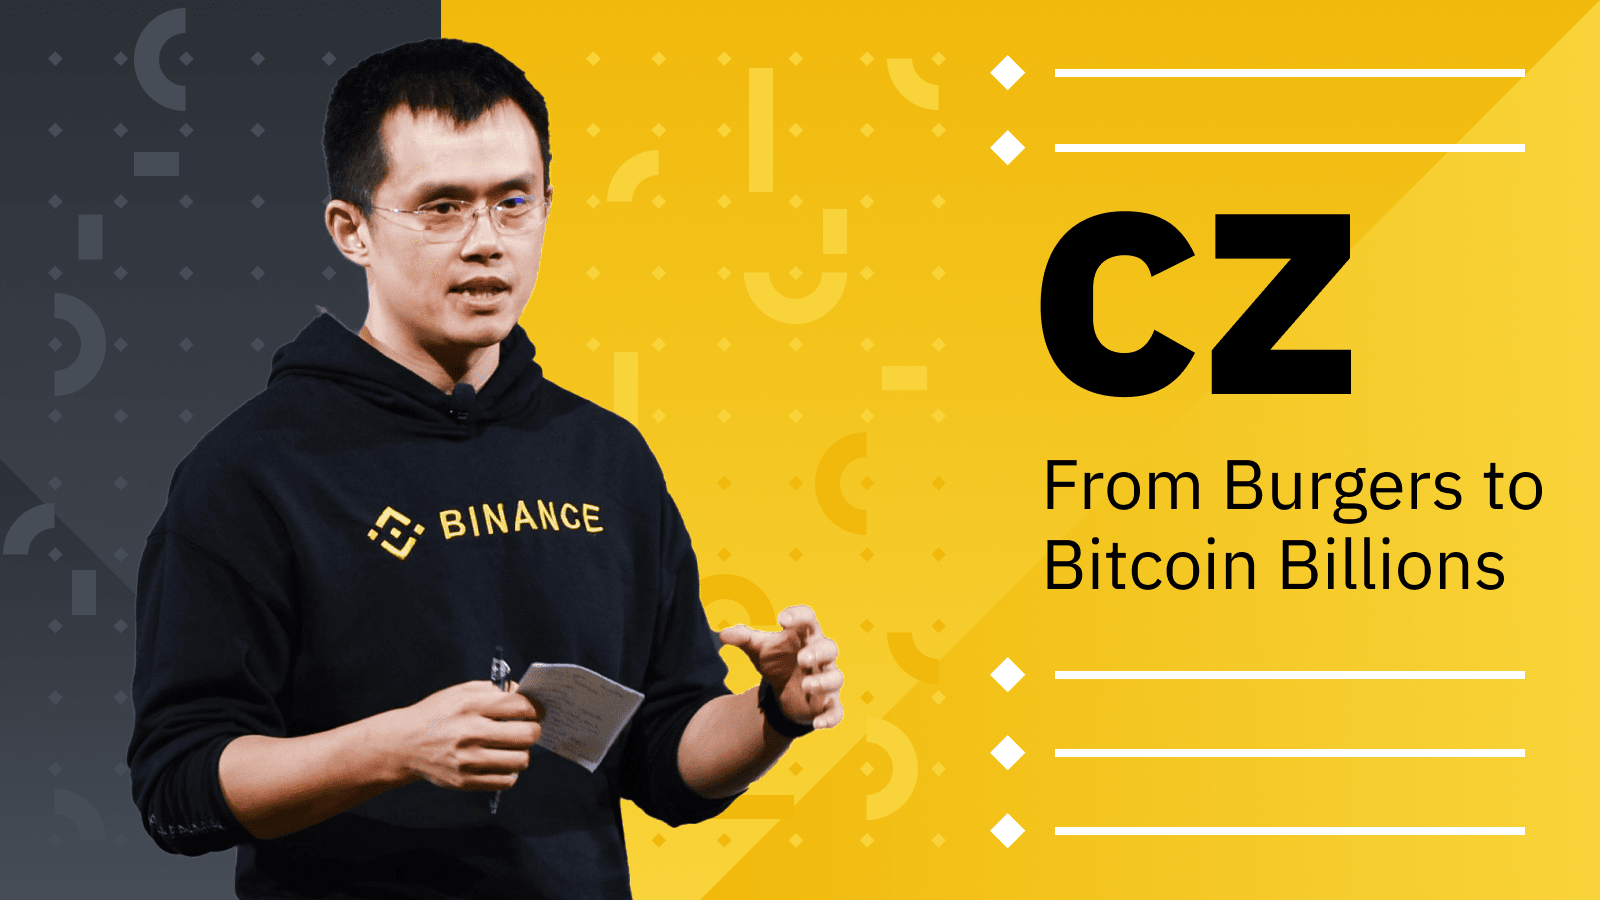 Binance's CZ Denied Permission to Travel by U.S. Judge for the Second Time